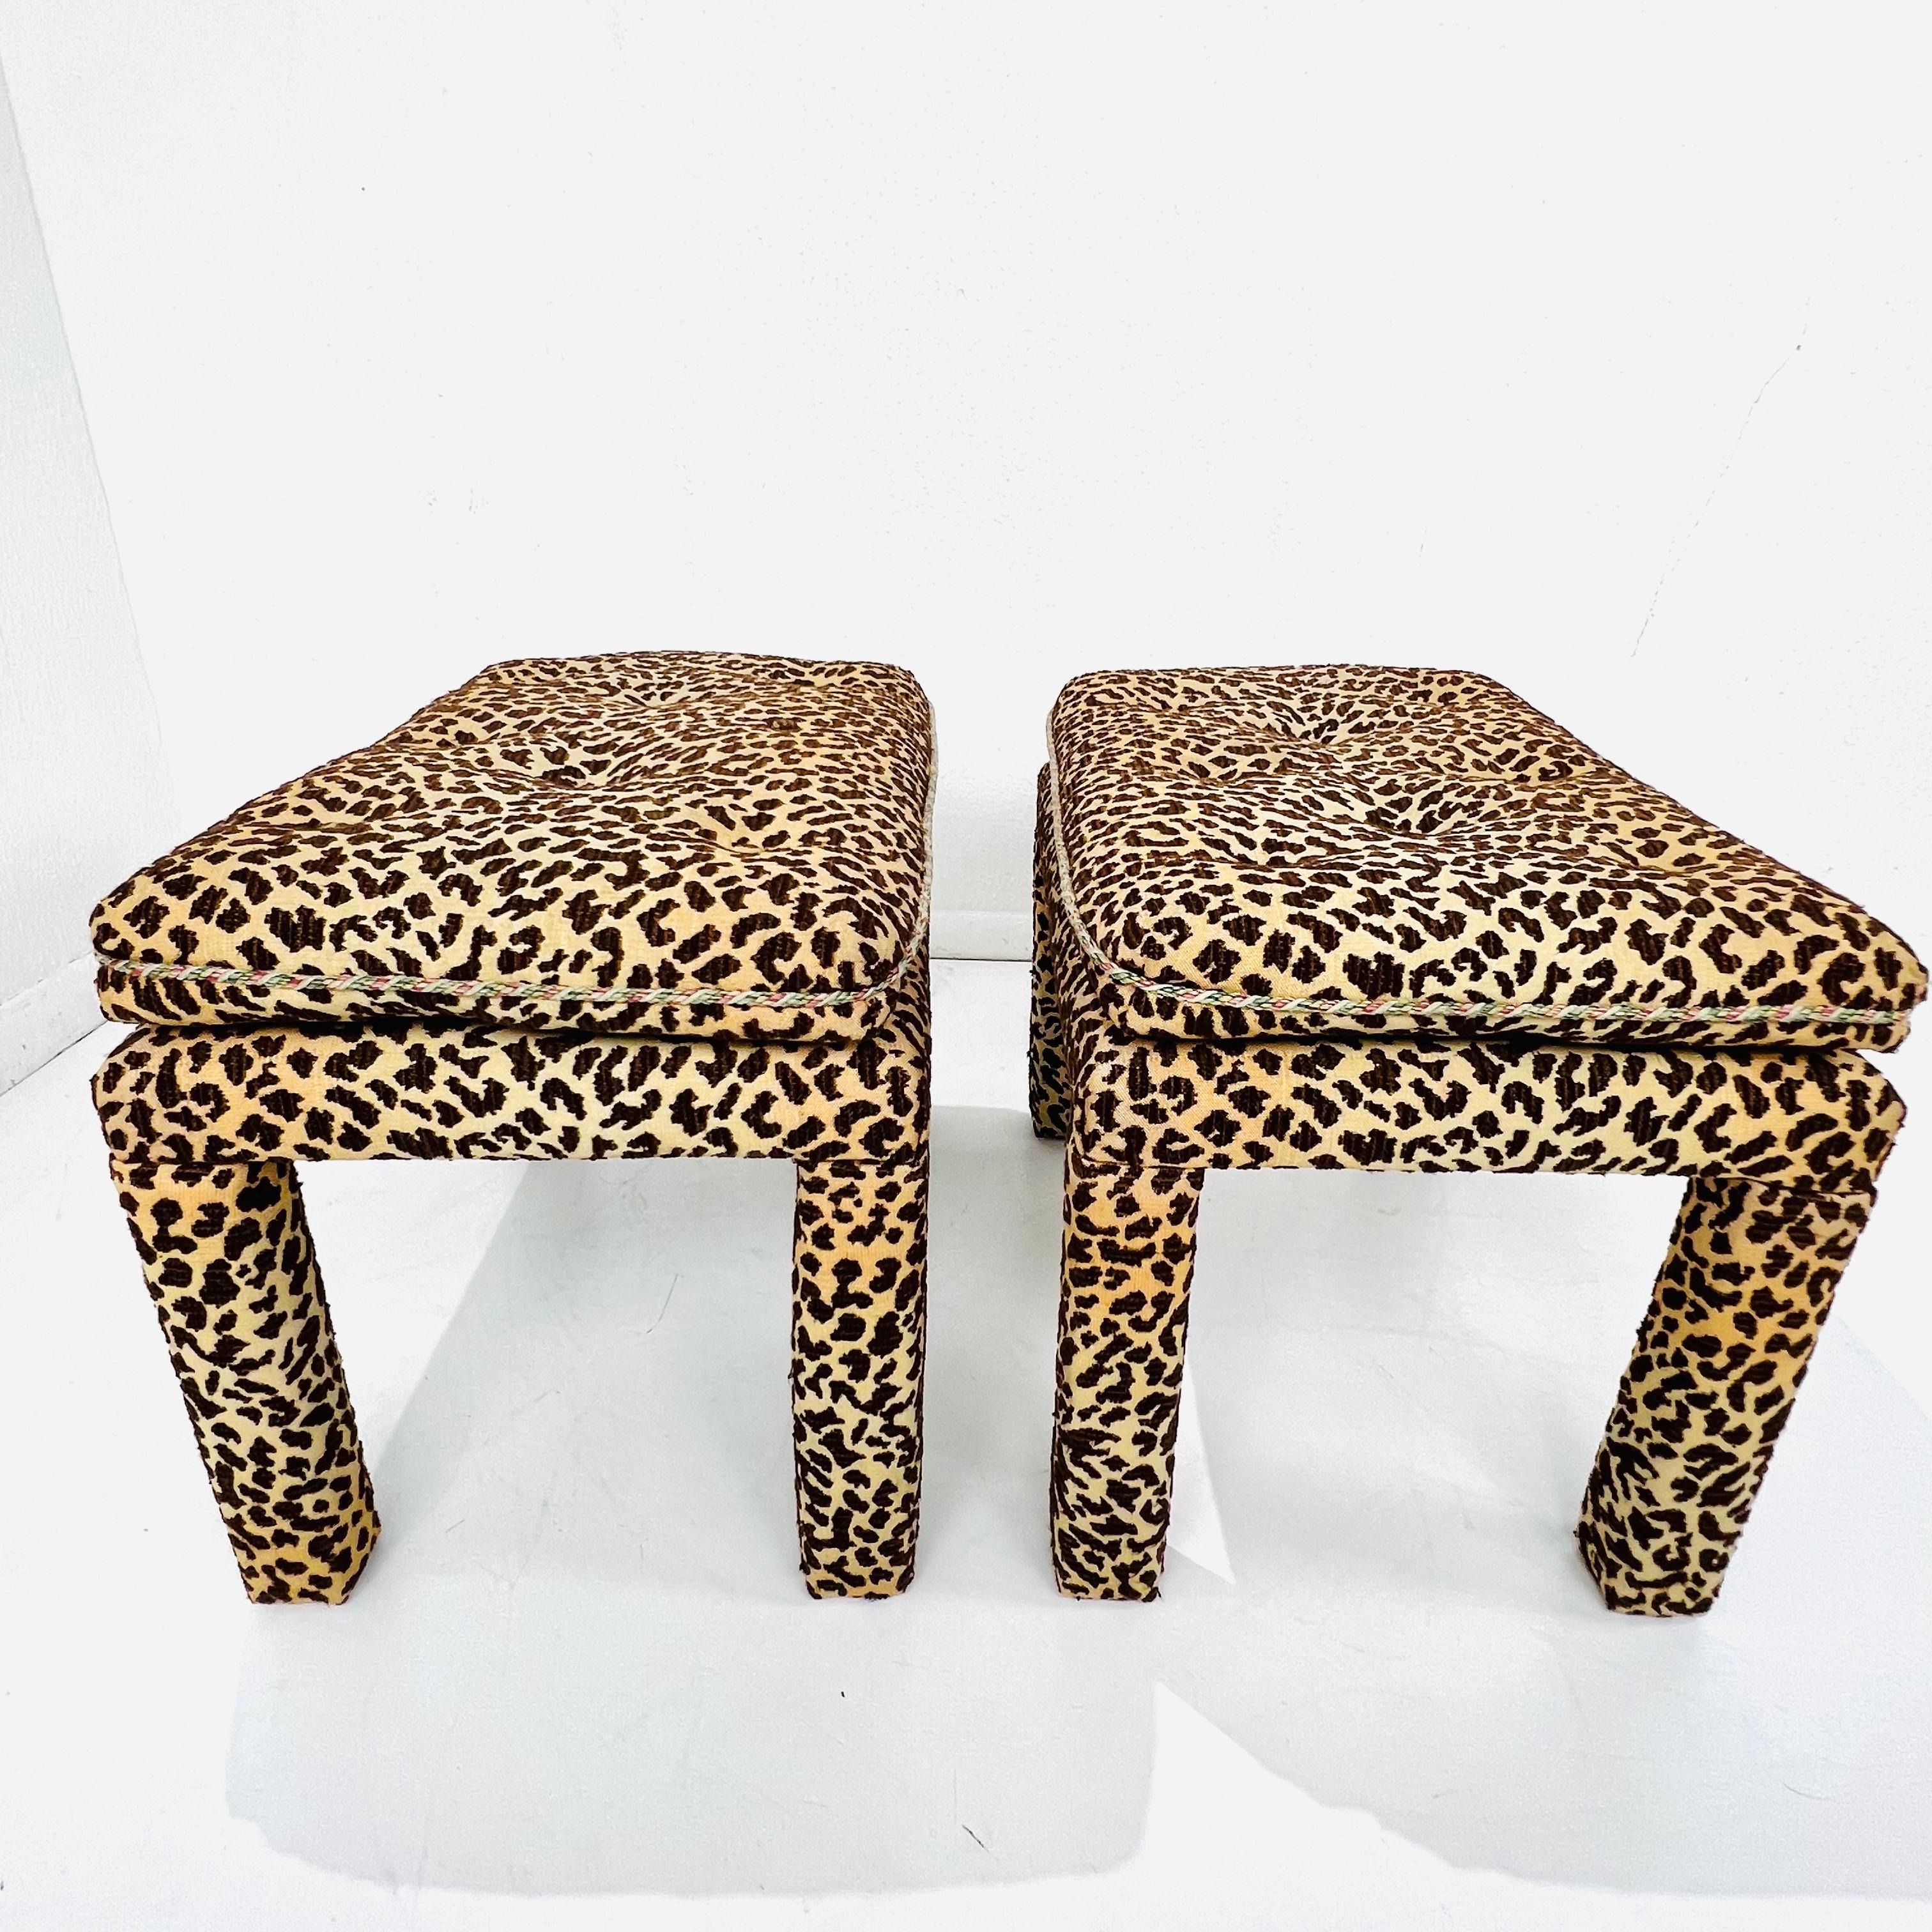 Pair of classic midcentury Parsons style ottomans with high-end leopard upholstery. These gorgeous ottomans/stools/benches are a great size and a versatile accent that will work in nearly any interior!
Very good vintage condition with minimal wear